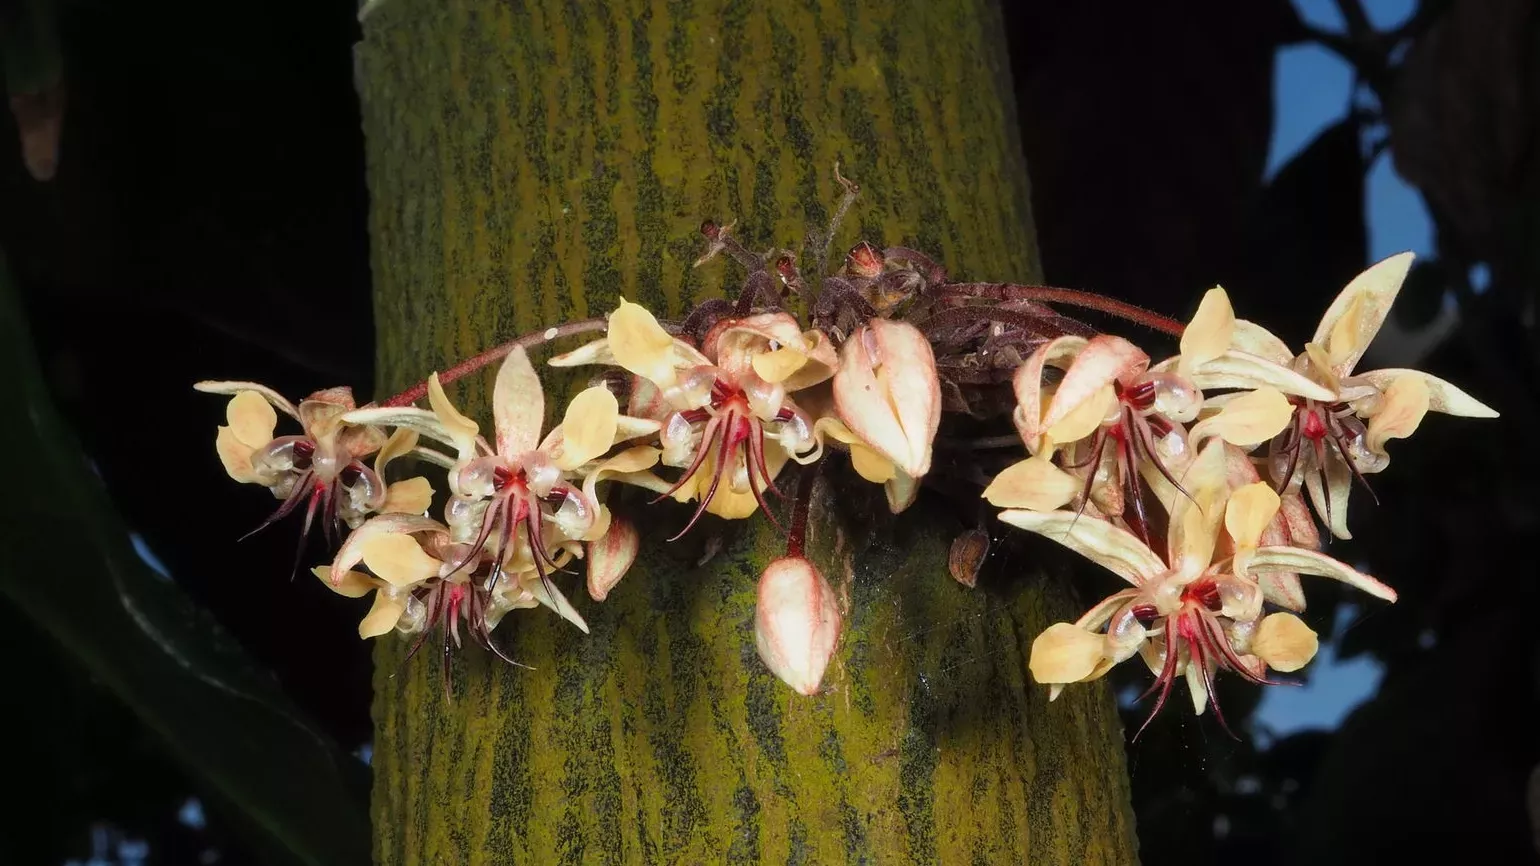 Yellowish-pink flowers growing from cacao tree trunk